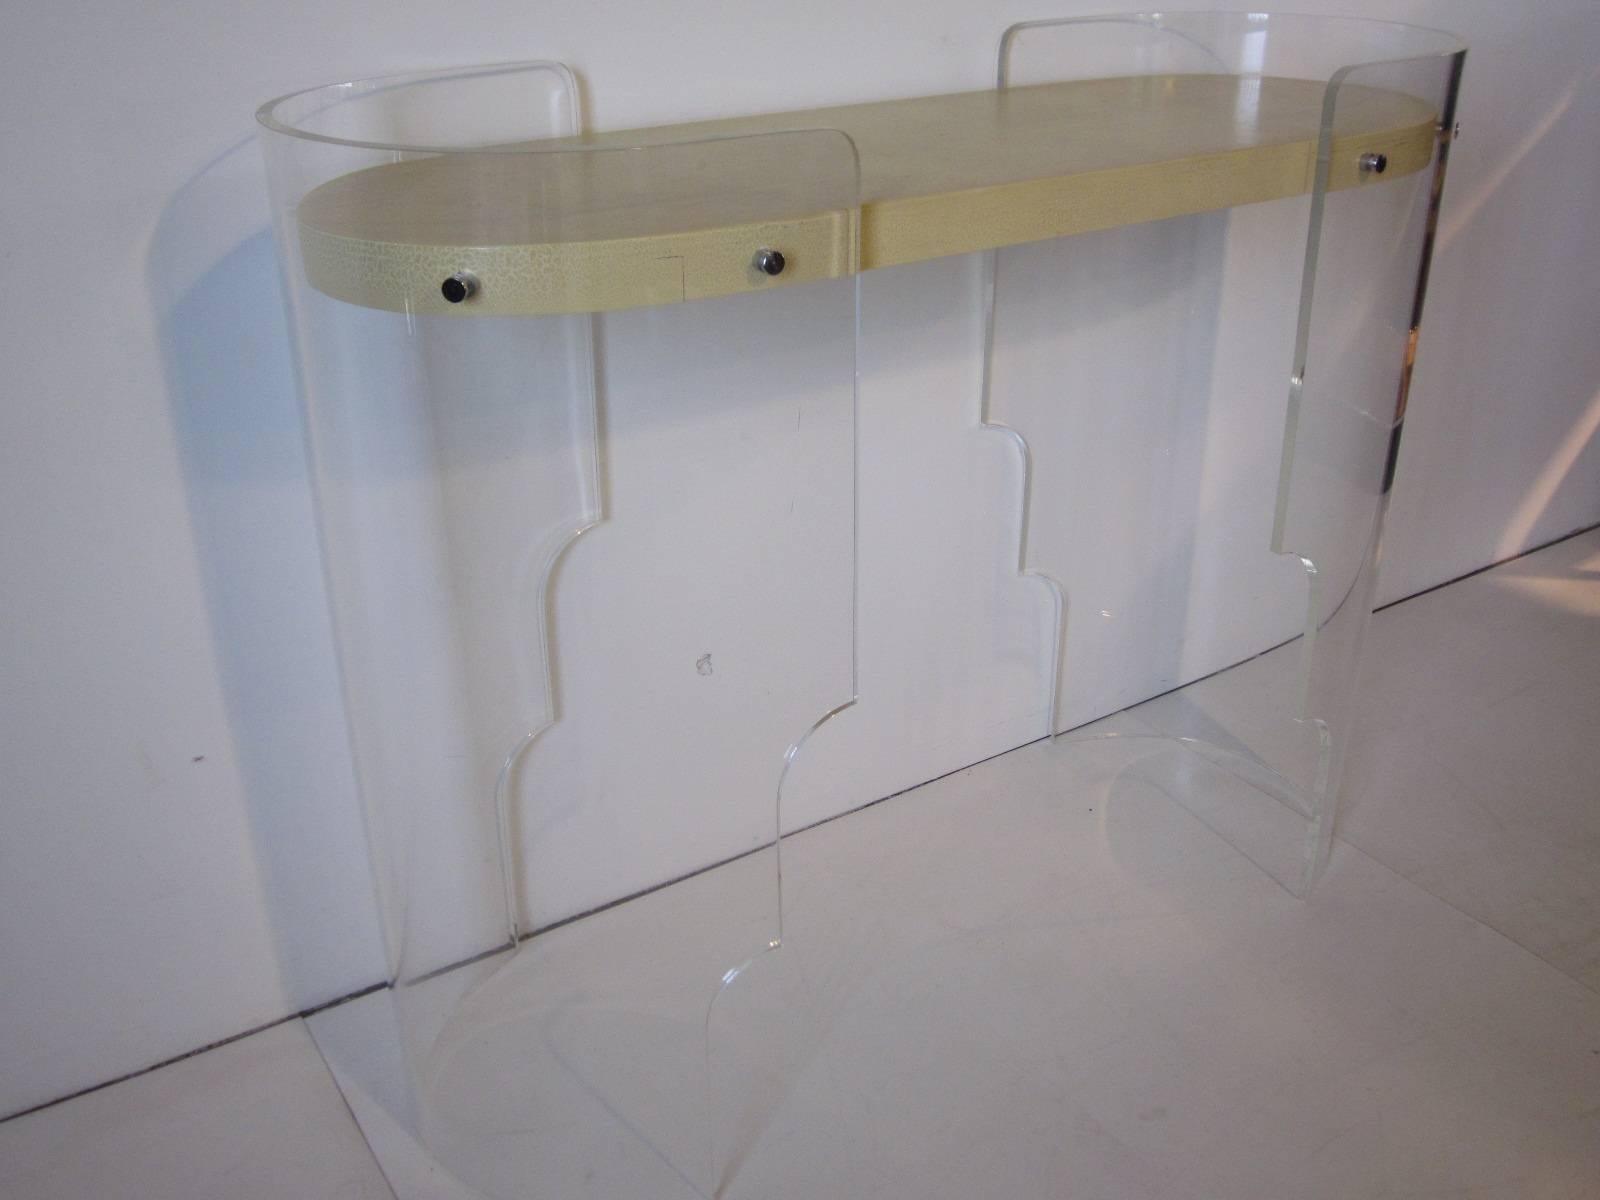 A Lucite console table or bar with curved end pieces and cut a way legs topped by a wood top in an alligator textured painted finish in the manner of Kagan. The wood top to floor measurement is 36